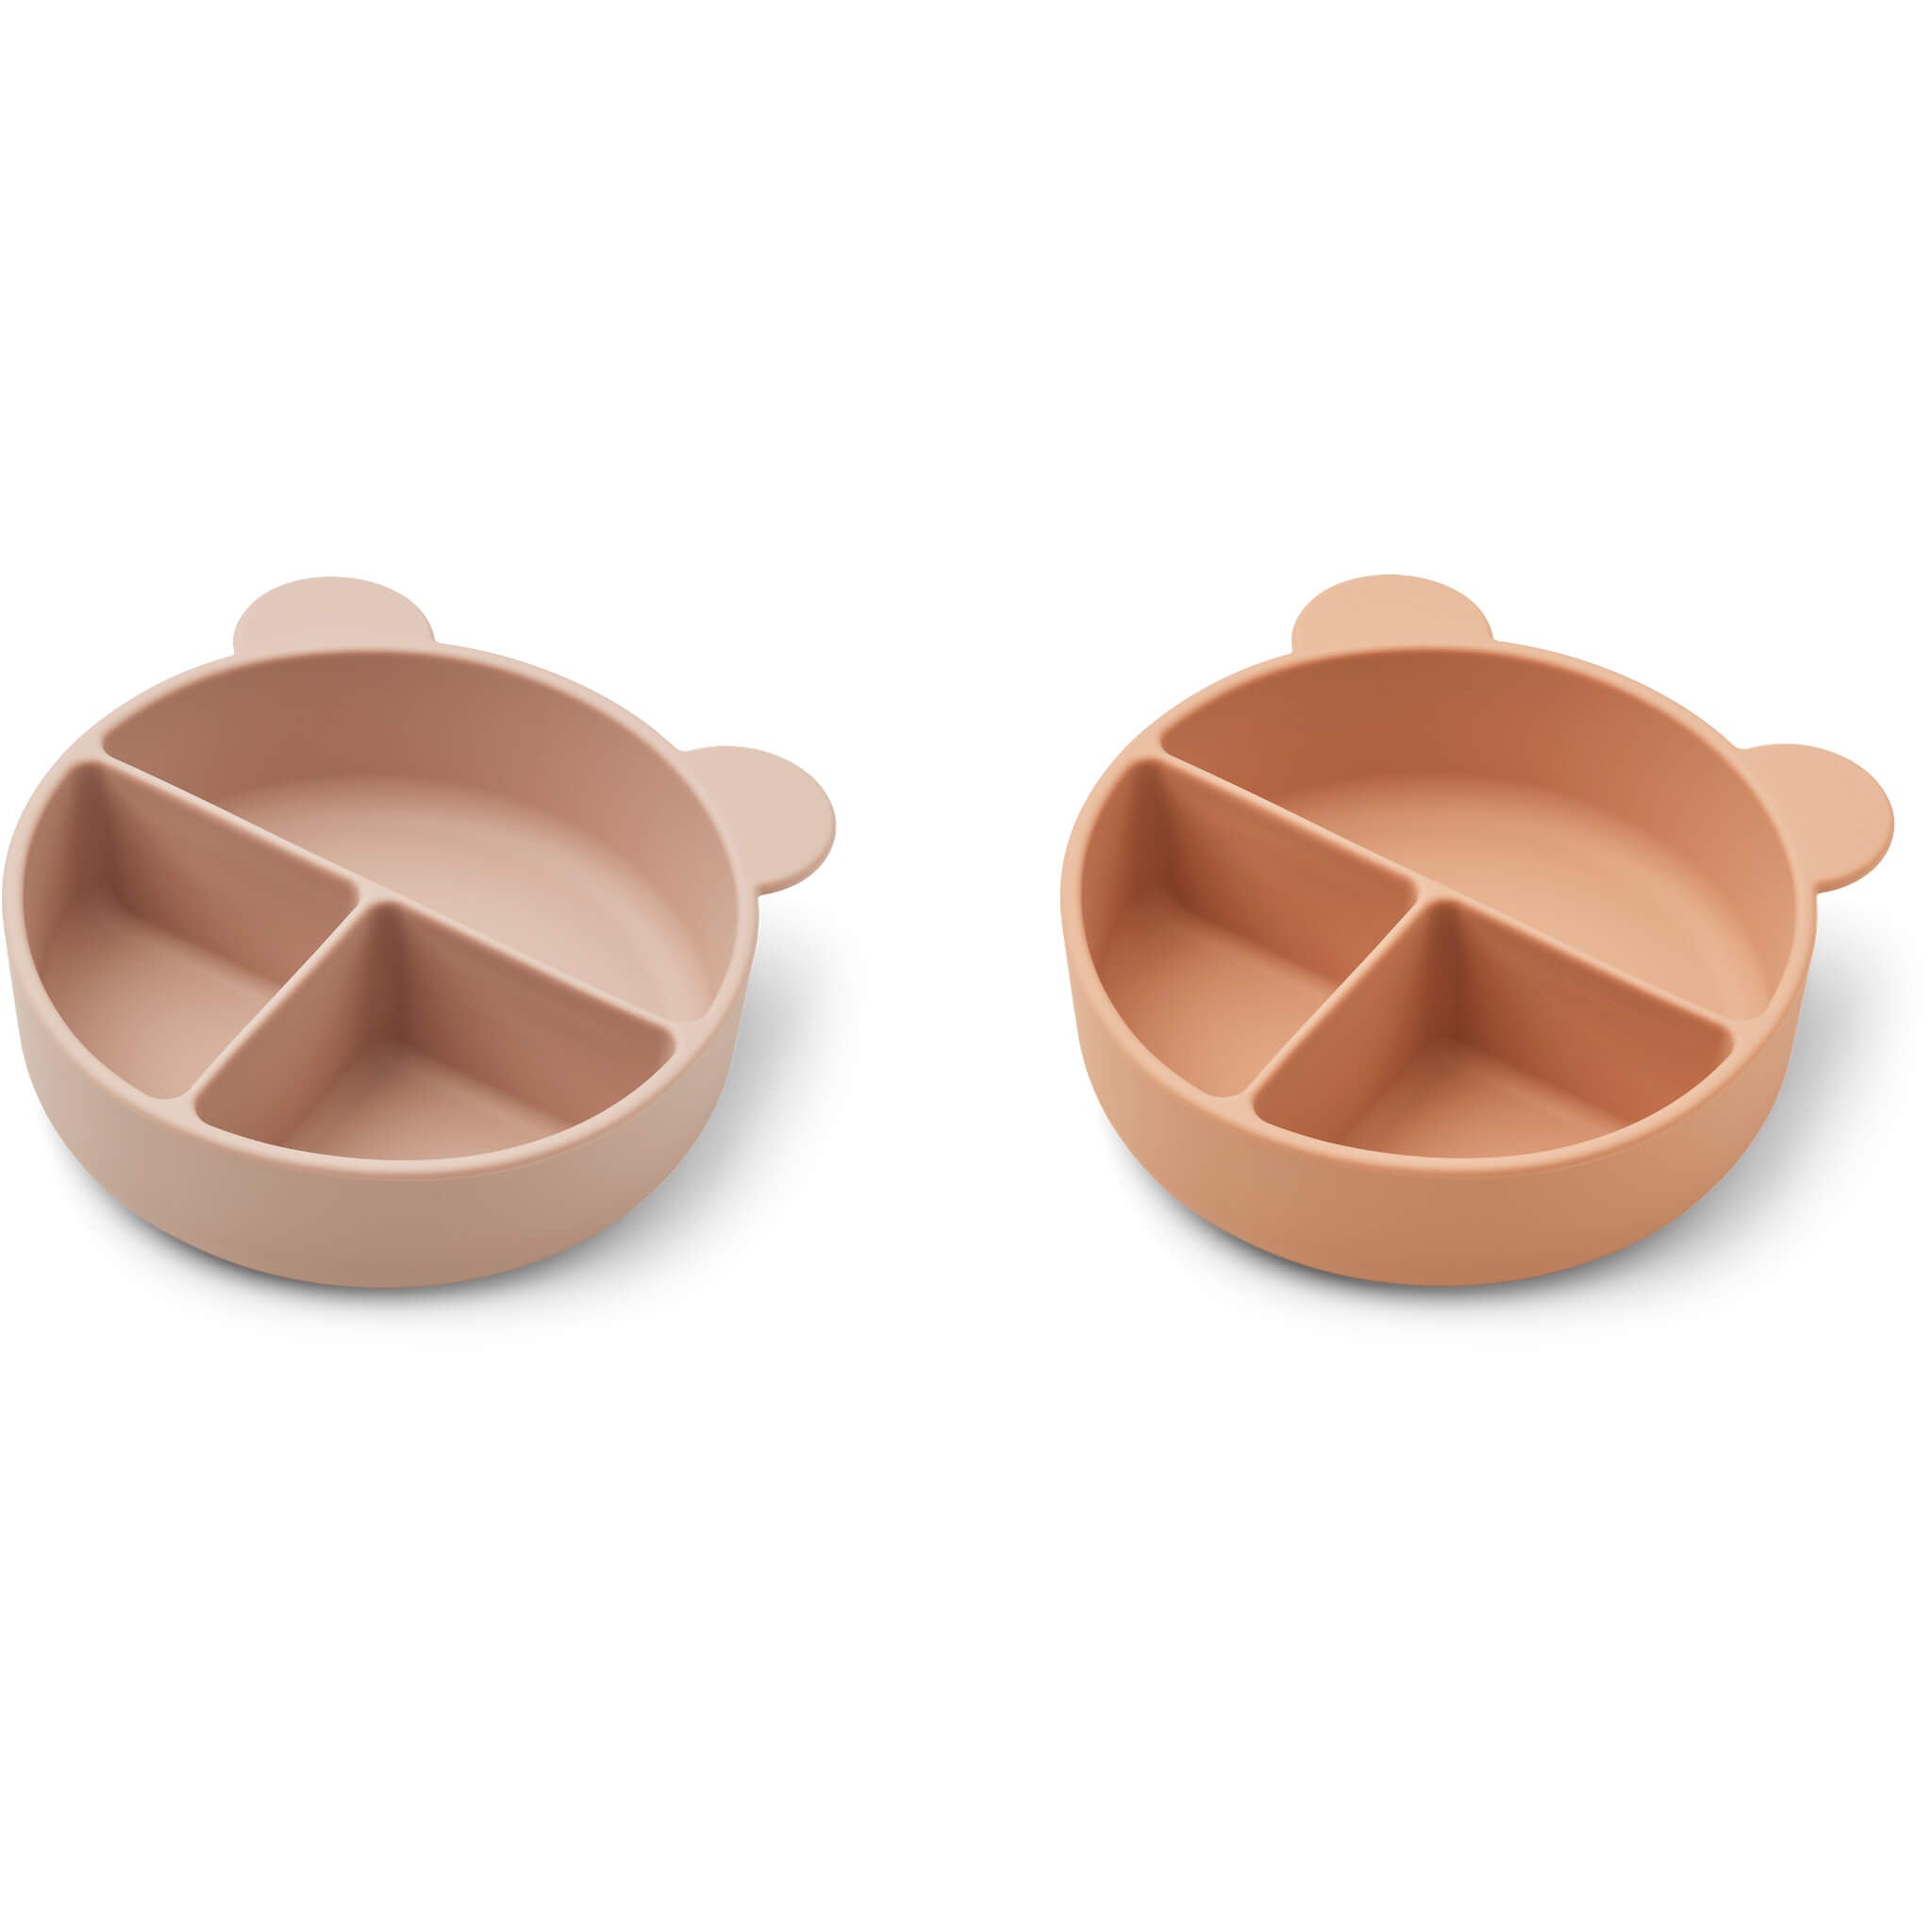 Connie Divider Bowl - Rose (2 Pack)